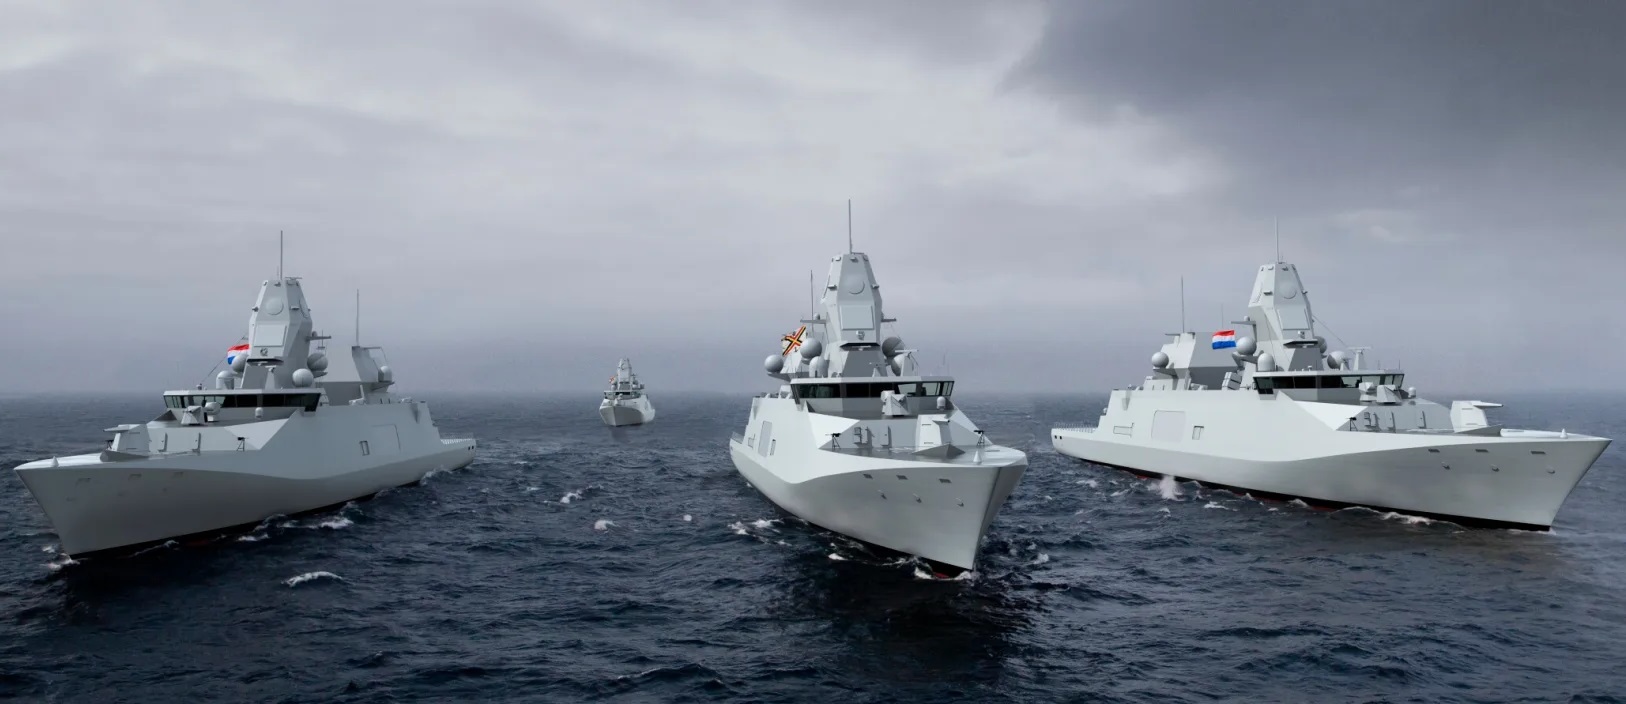 Damen Naval Contracts Kongsberg Maritime Sweden to Supply Propeller Systems for Anti-Submarine Warfare Frigates